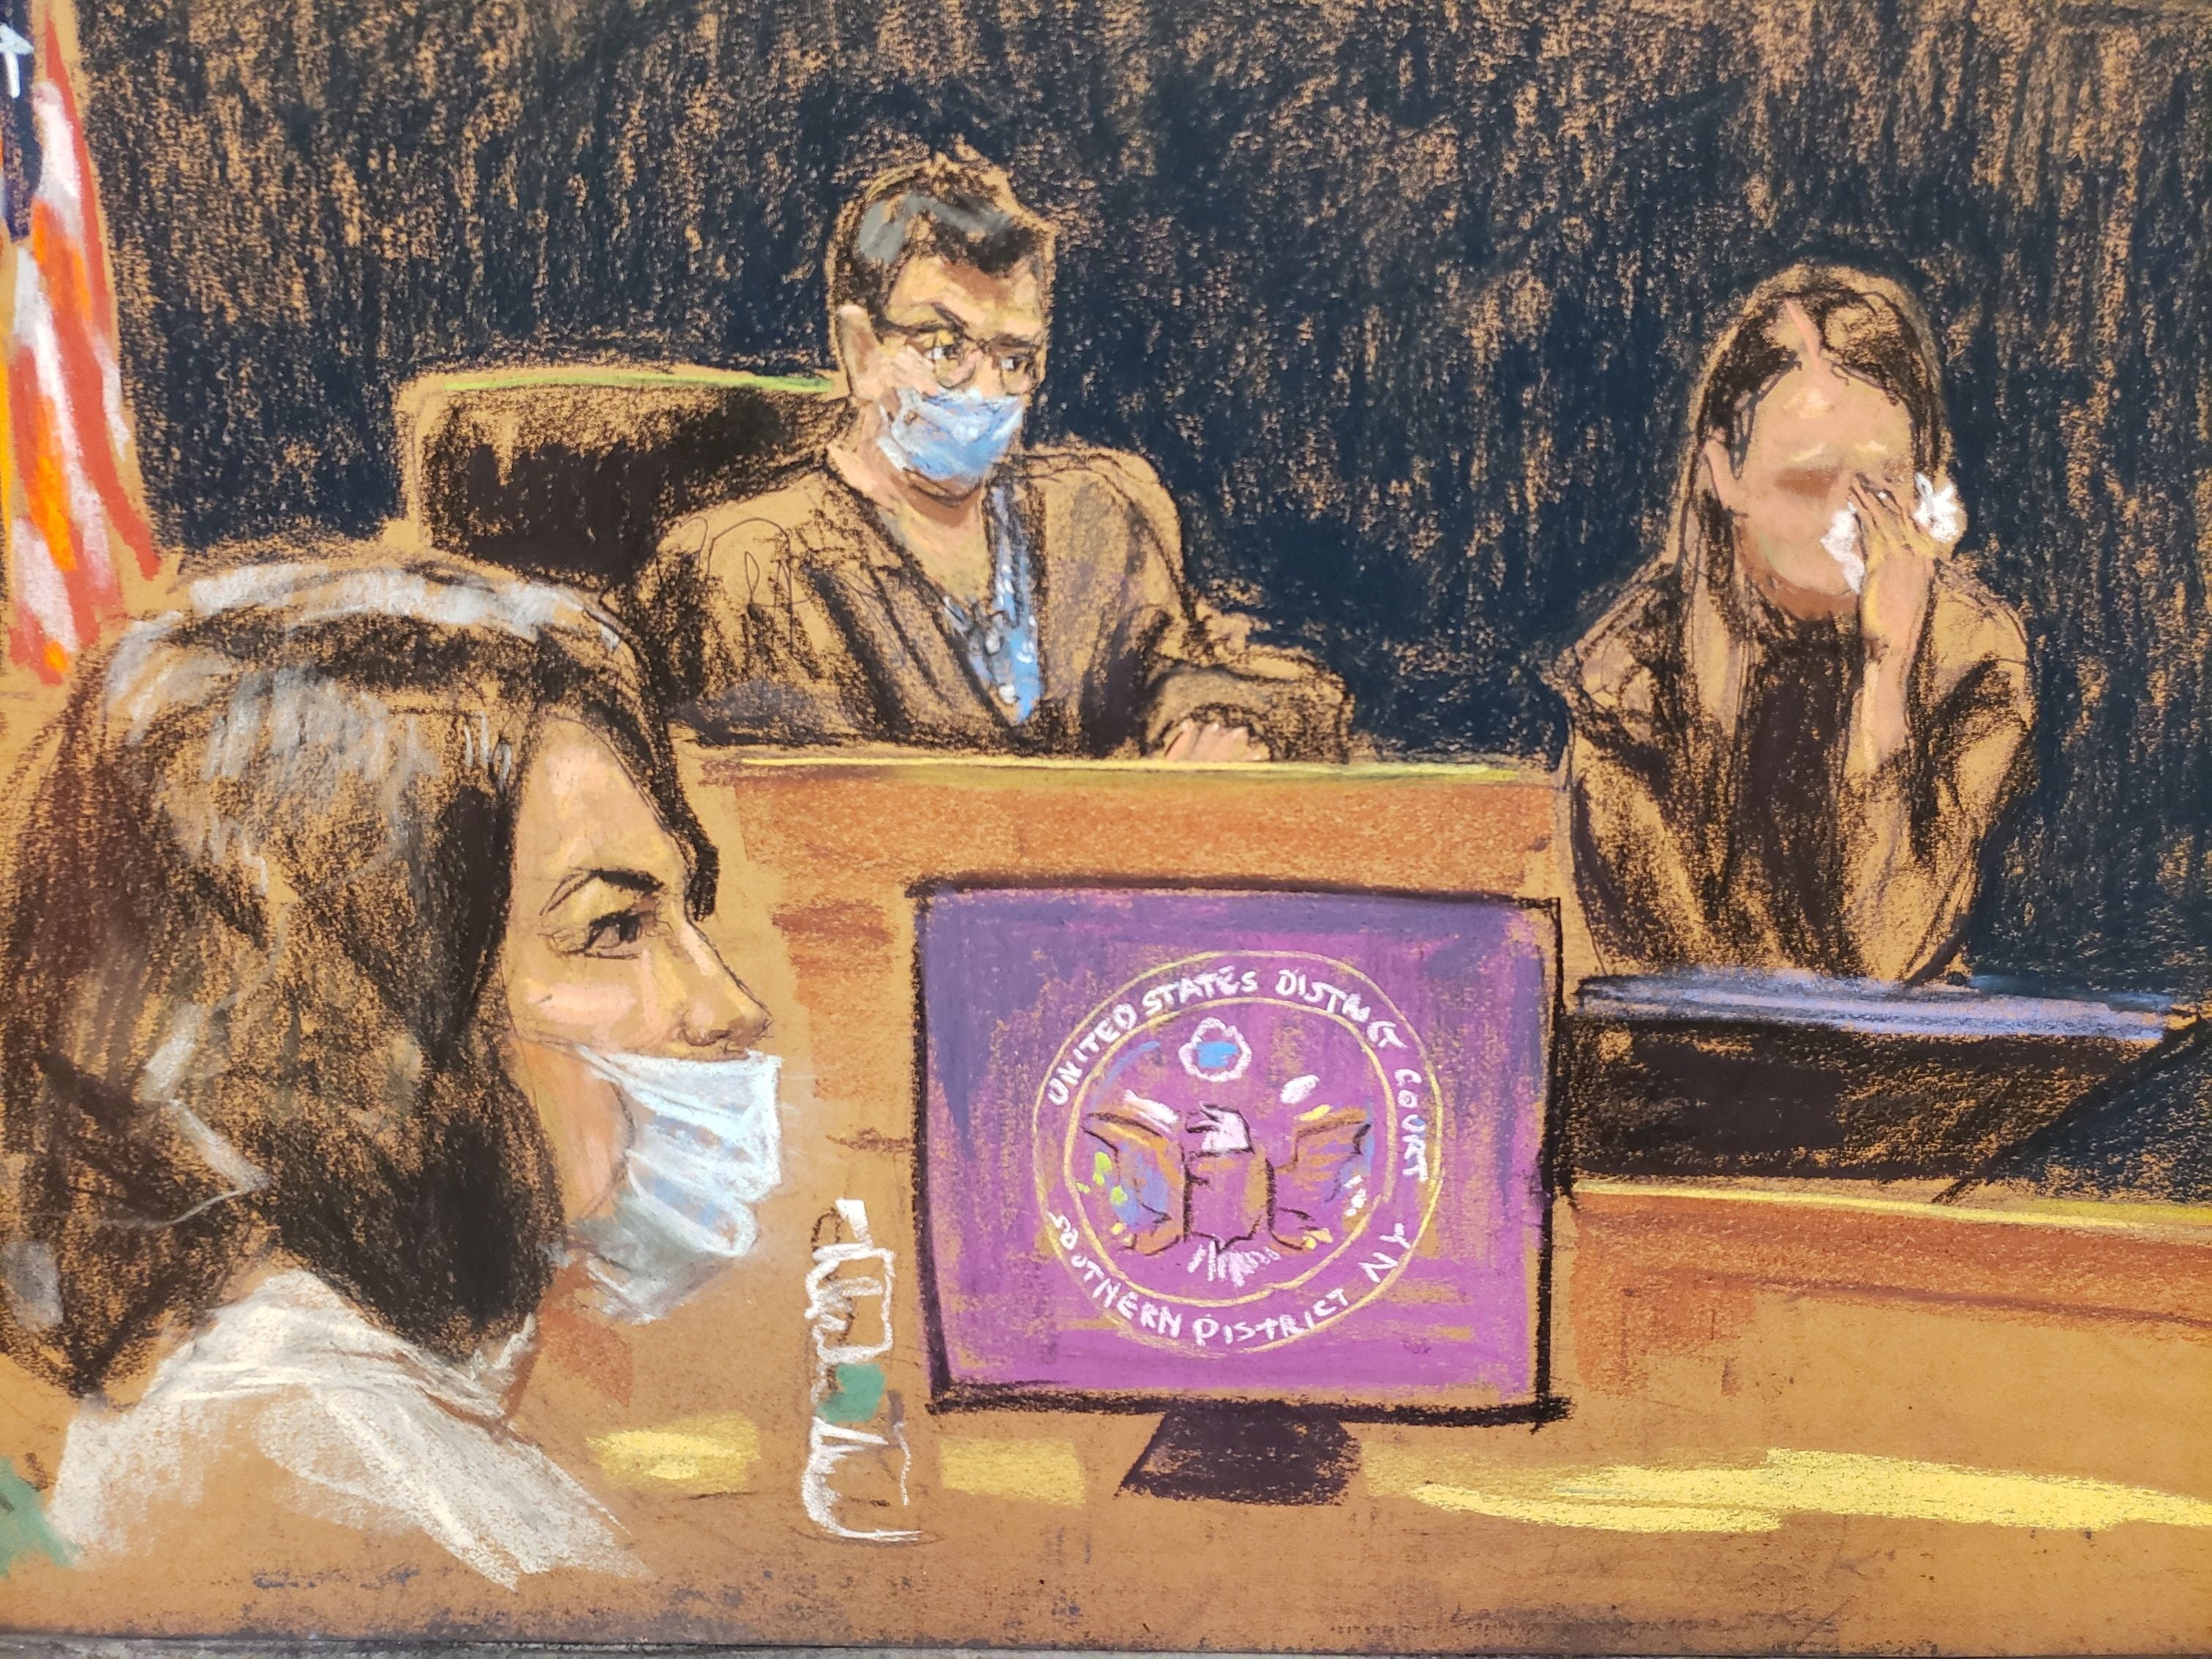 Witness ‘Jane’ testifies during Ghislaine Maxwell's trial on charges of sex trafficking, in a courtroom sketch in New York City